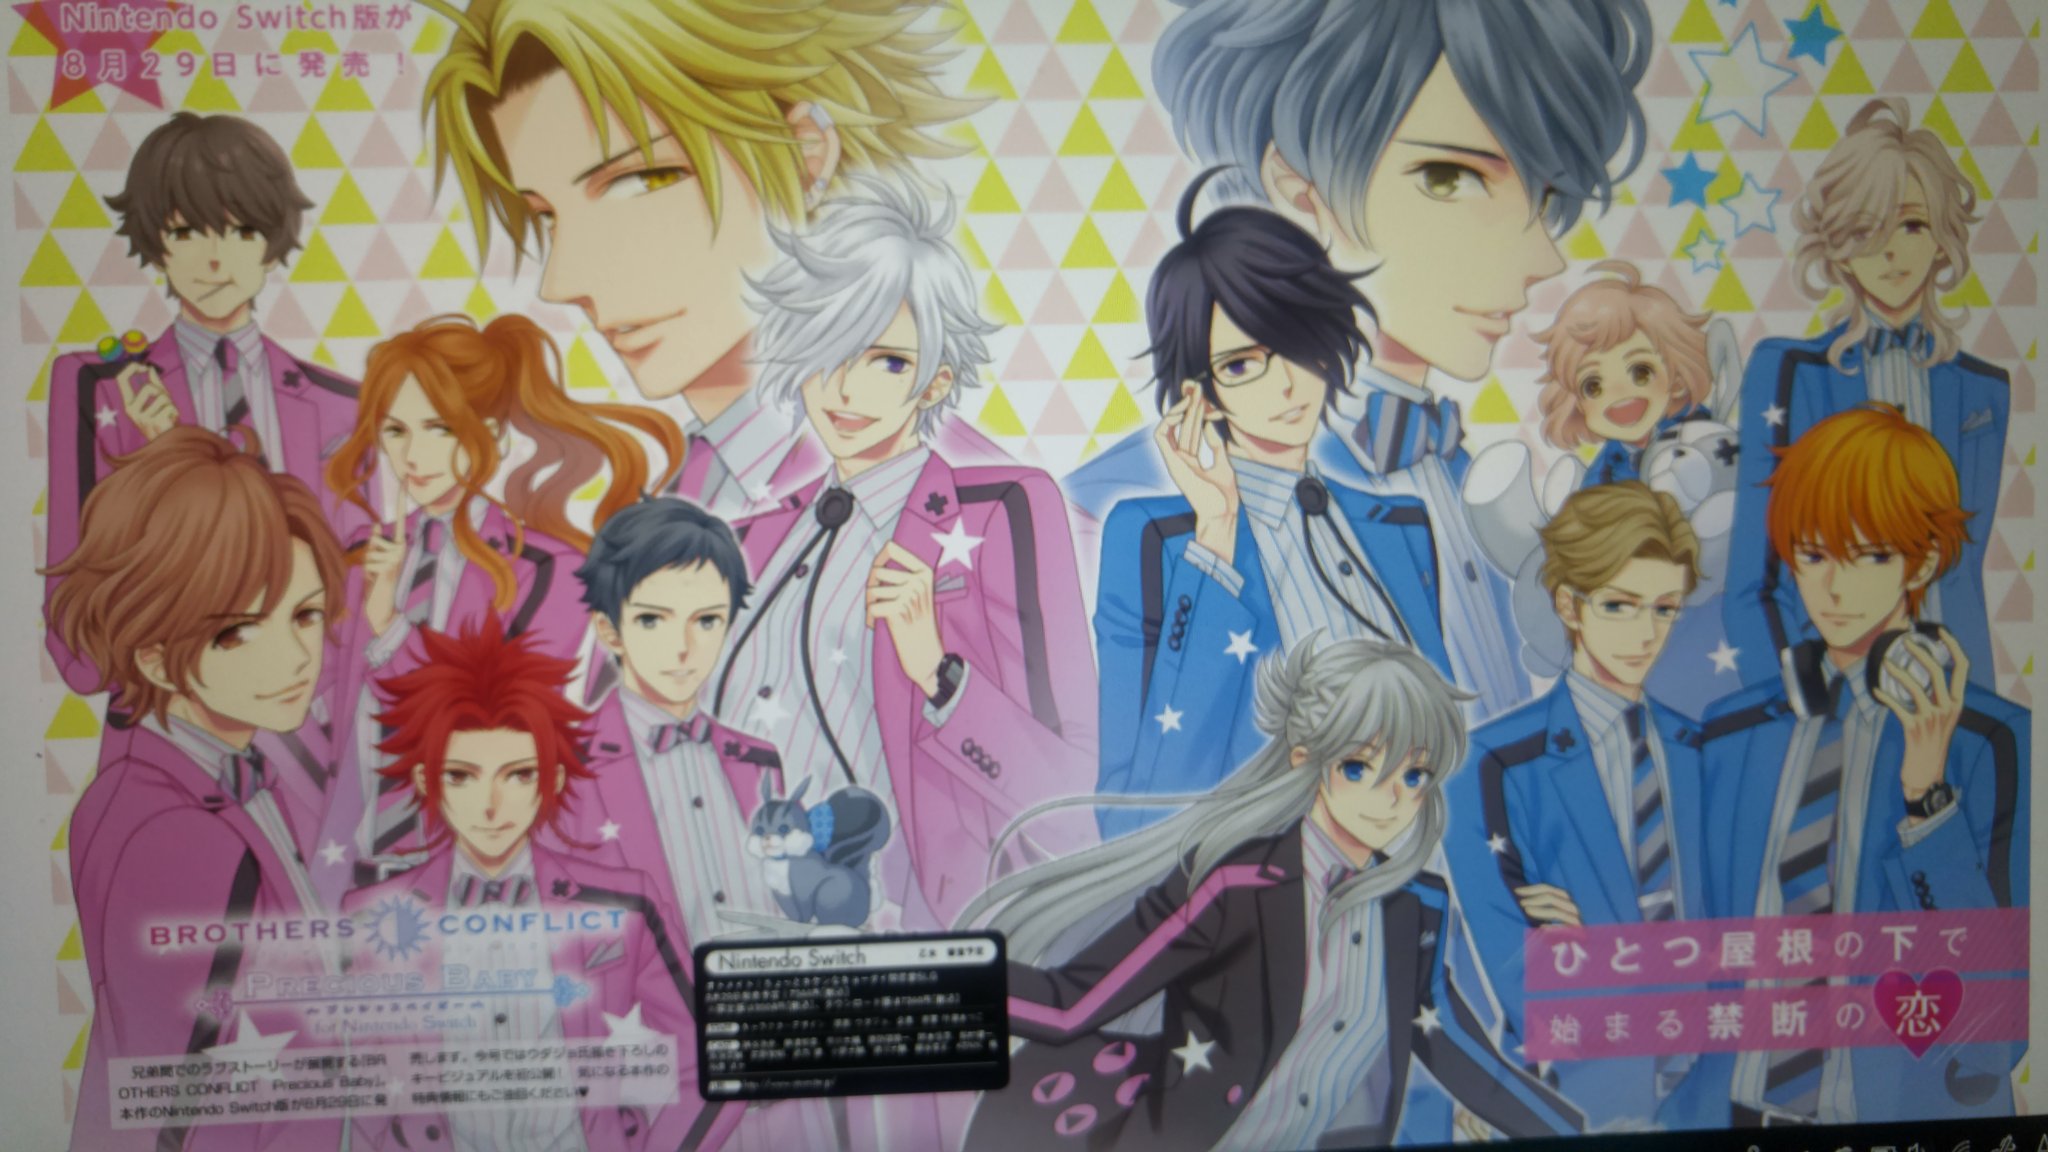 Otome Visual Novel Collection Brothers Conflict Precious Baby Coming To Switch On August 29 In Japan Gematsu